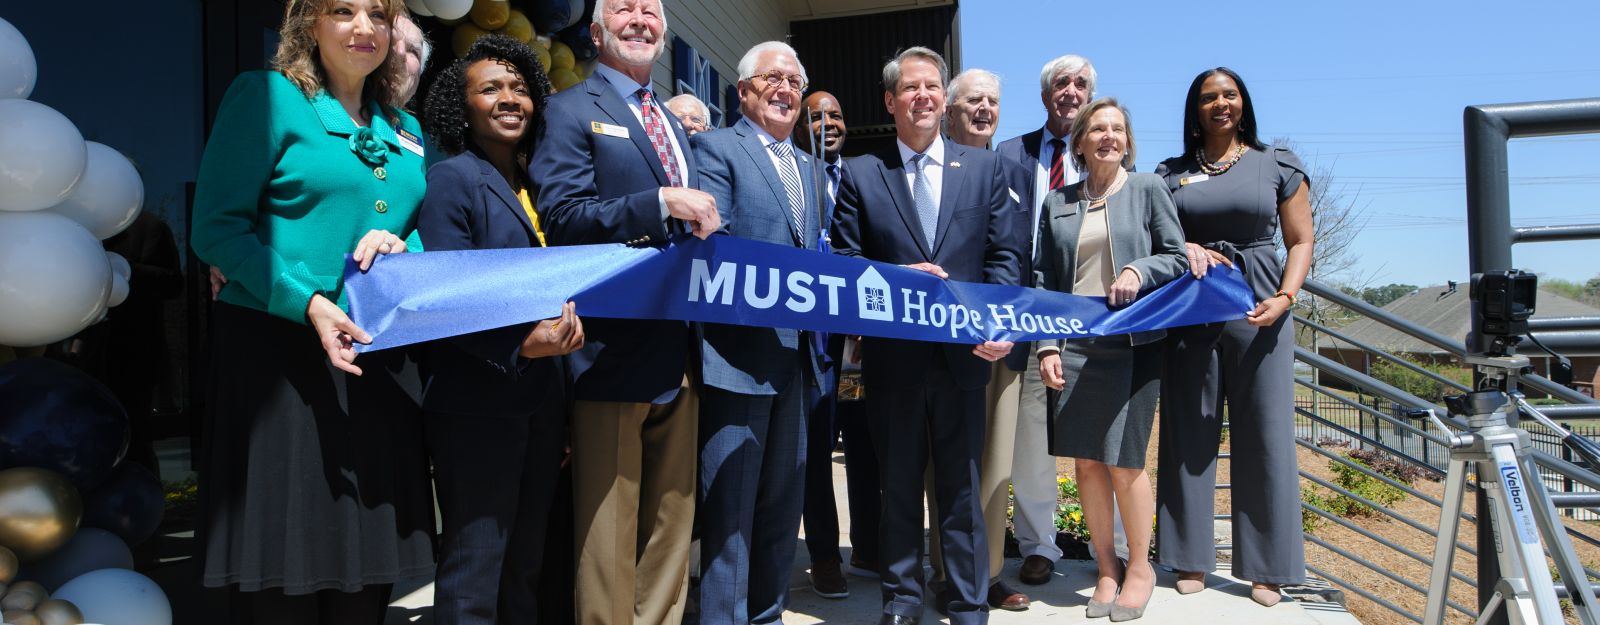 MUST Hope House Ribbon Cutting